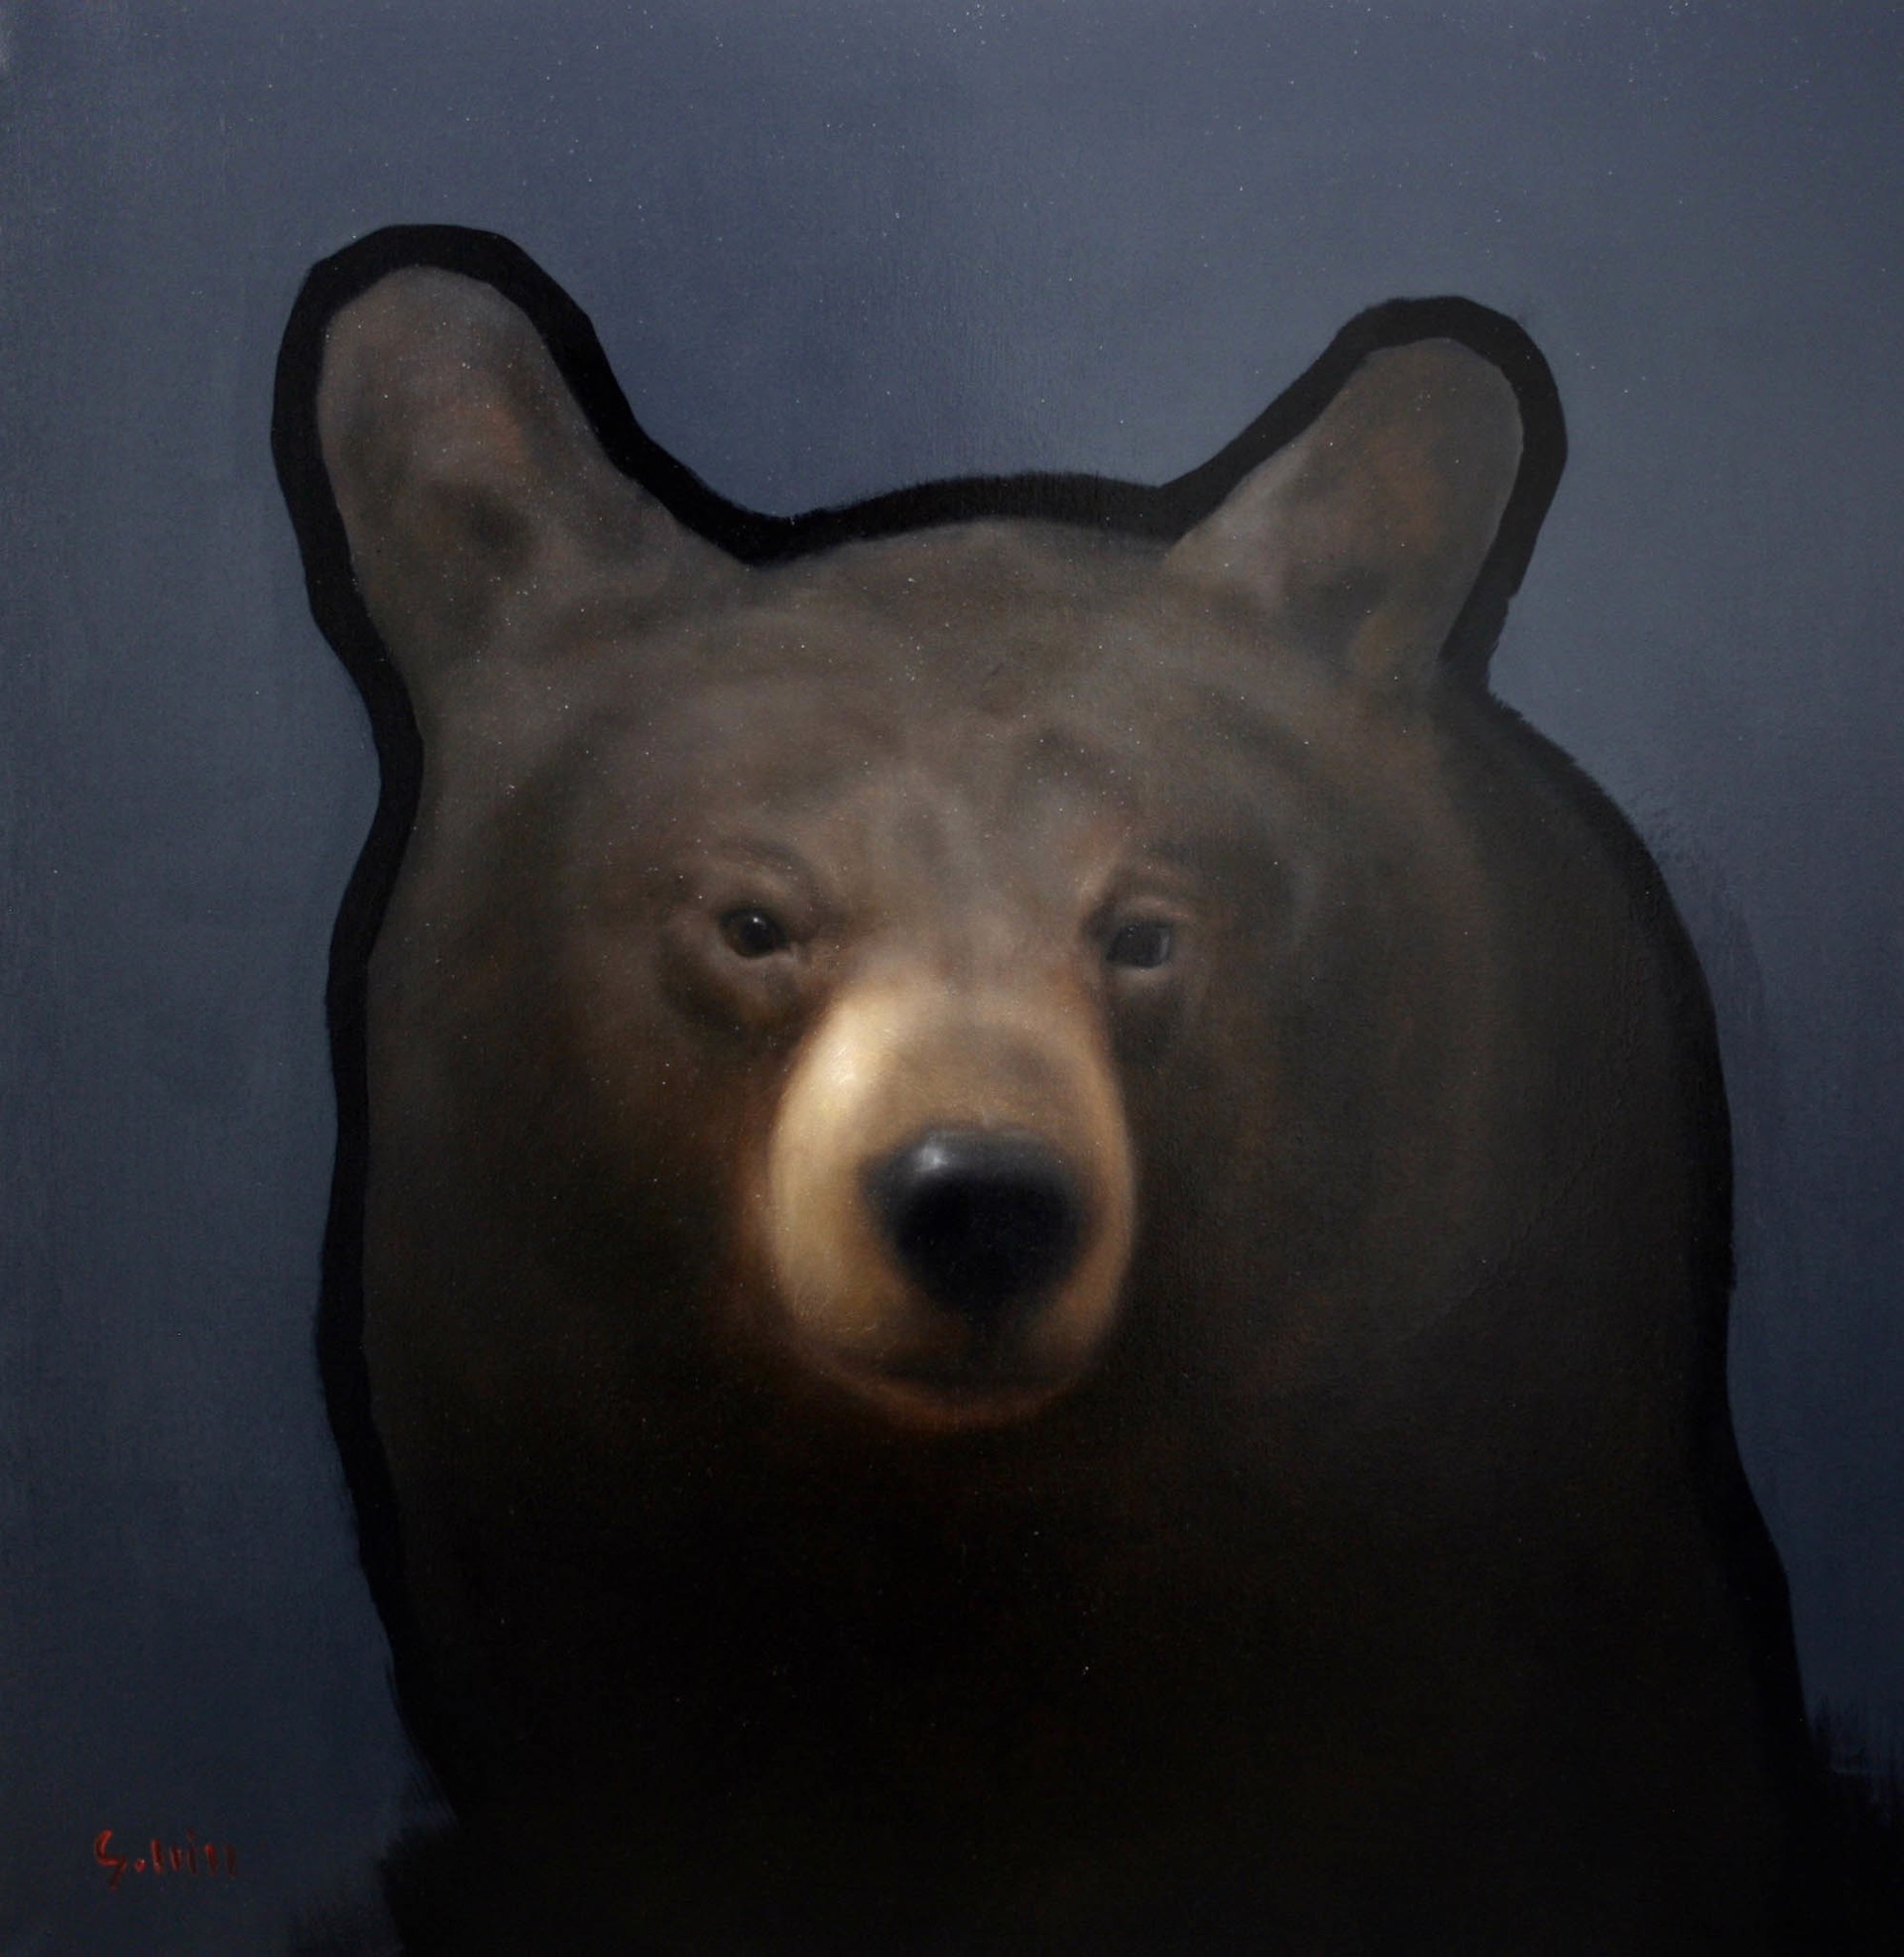 Original Oil Painting Featuring A Black Bear Outlined In Black On Gray Background